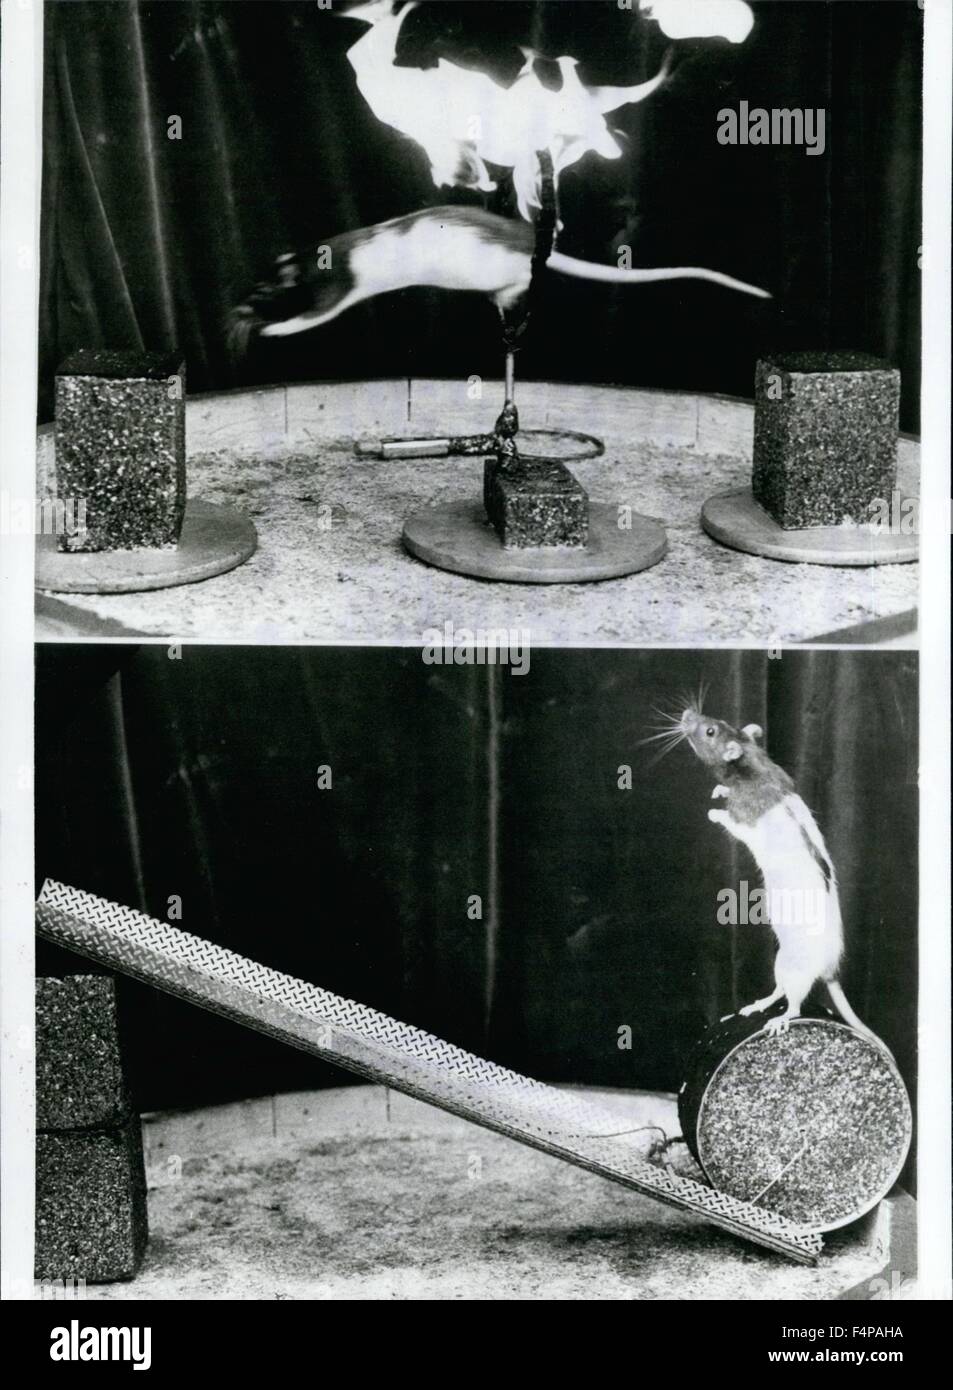 1965 - ''Circus Mouse'' Guest In Hamburg ''There is no mouse biting off the threat''. what are showing these rats are tip-top, there is one of the rodents jumping through a ring of fire (above) during the other one is trying to roll ''up a hill'' a drum (below) and the other ''artistic-fellows'' are coming up with further wire-rope-and balance acts. With this very unusual circus-team Henry Gugelmann is the guest star in Hamburg. At the Gerhard Hauptman place is the guest star on his manage at all 70cm radiator, built-up and showing the astonished people what such humble animals are able to d Stock Photo